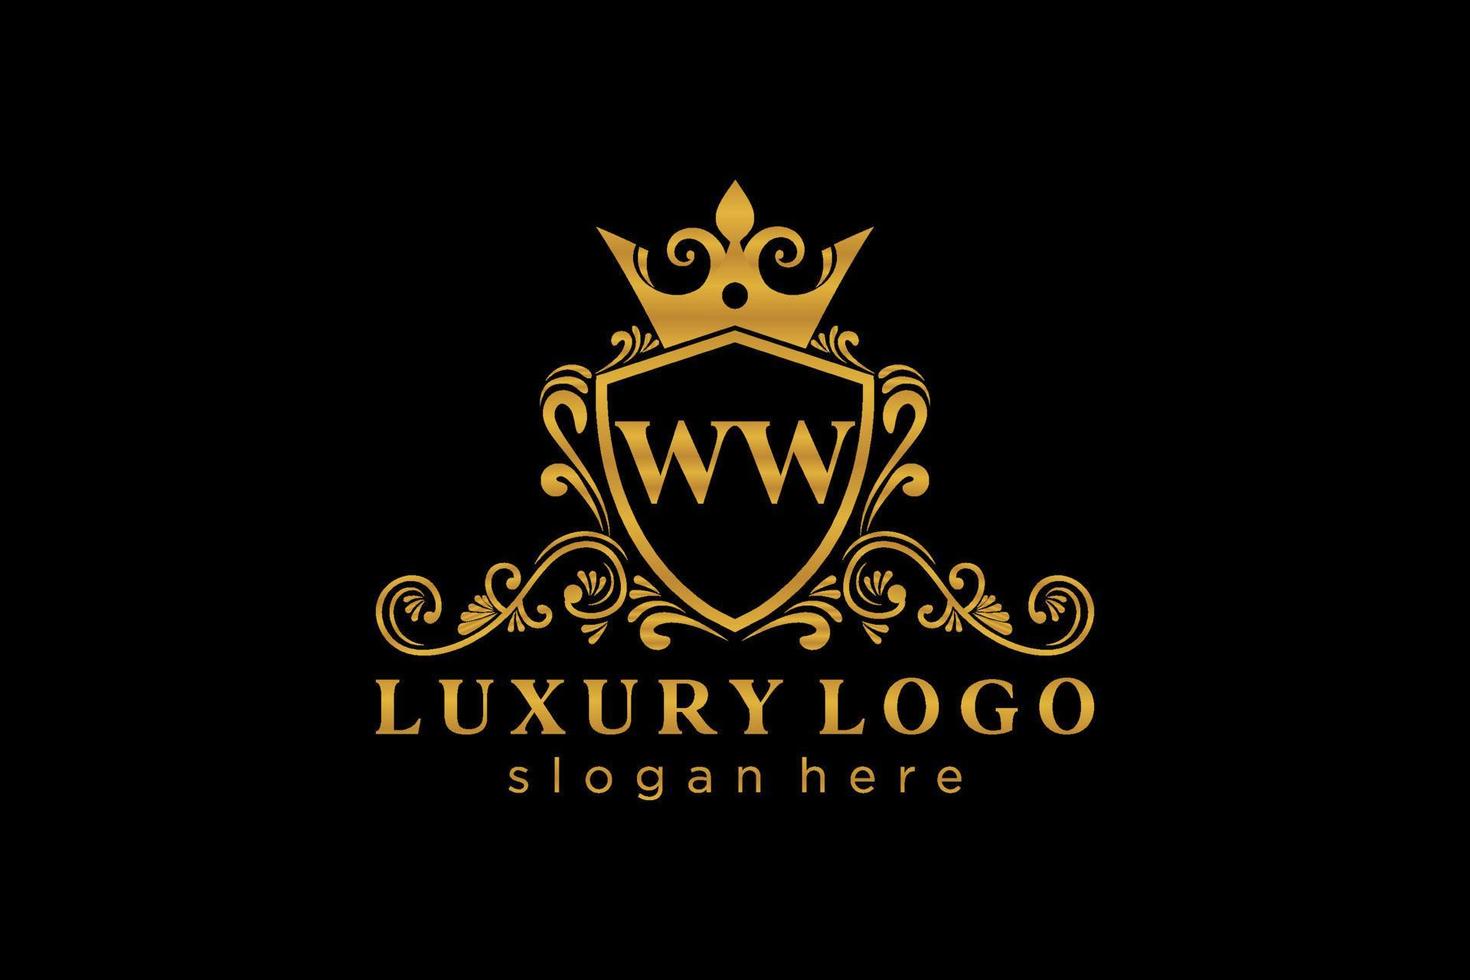 Initial WW Letter Royal Luxury Logo template in vector art for Restaurant, Royalty, Boutique, Cafe, Hotel, Heraldic, Jewelry, Fashion and other vector illustration.